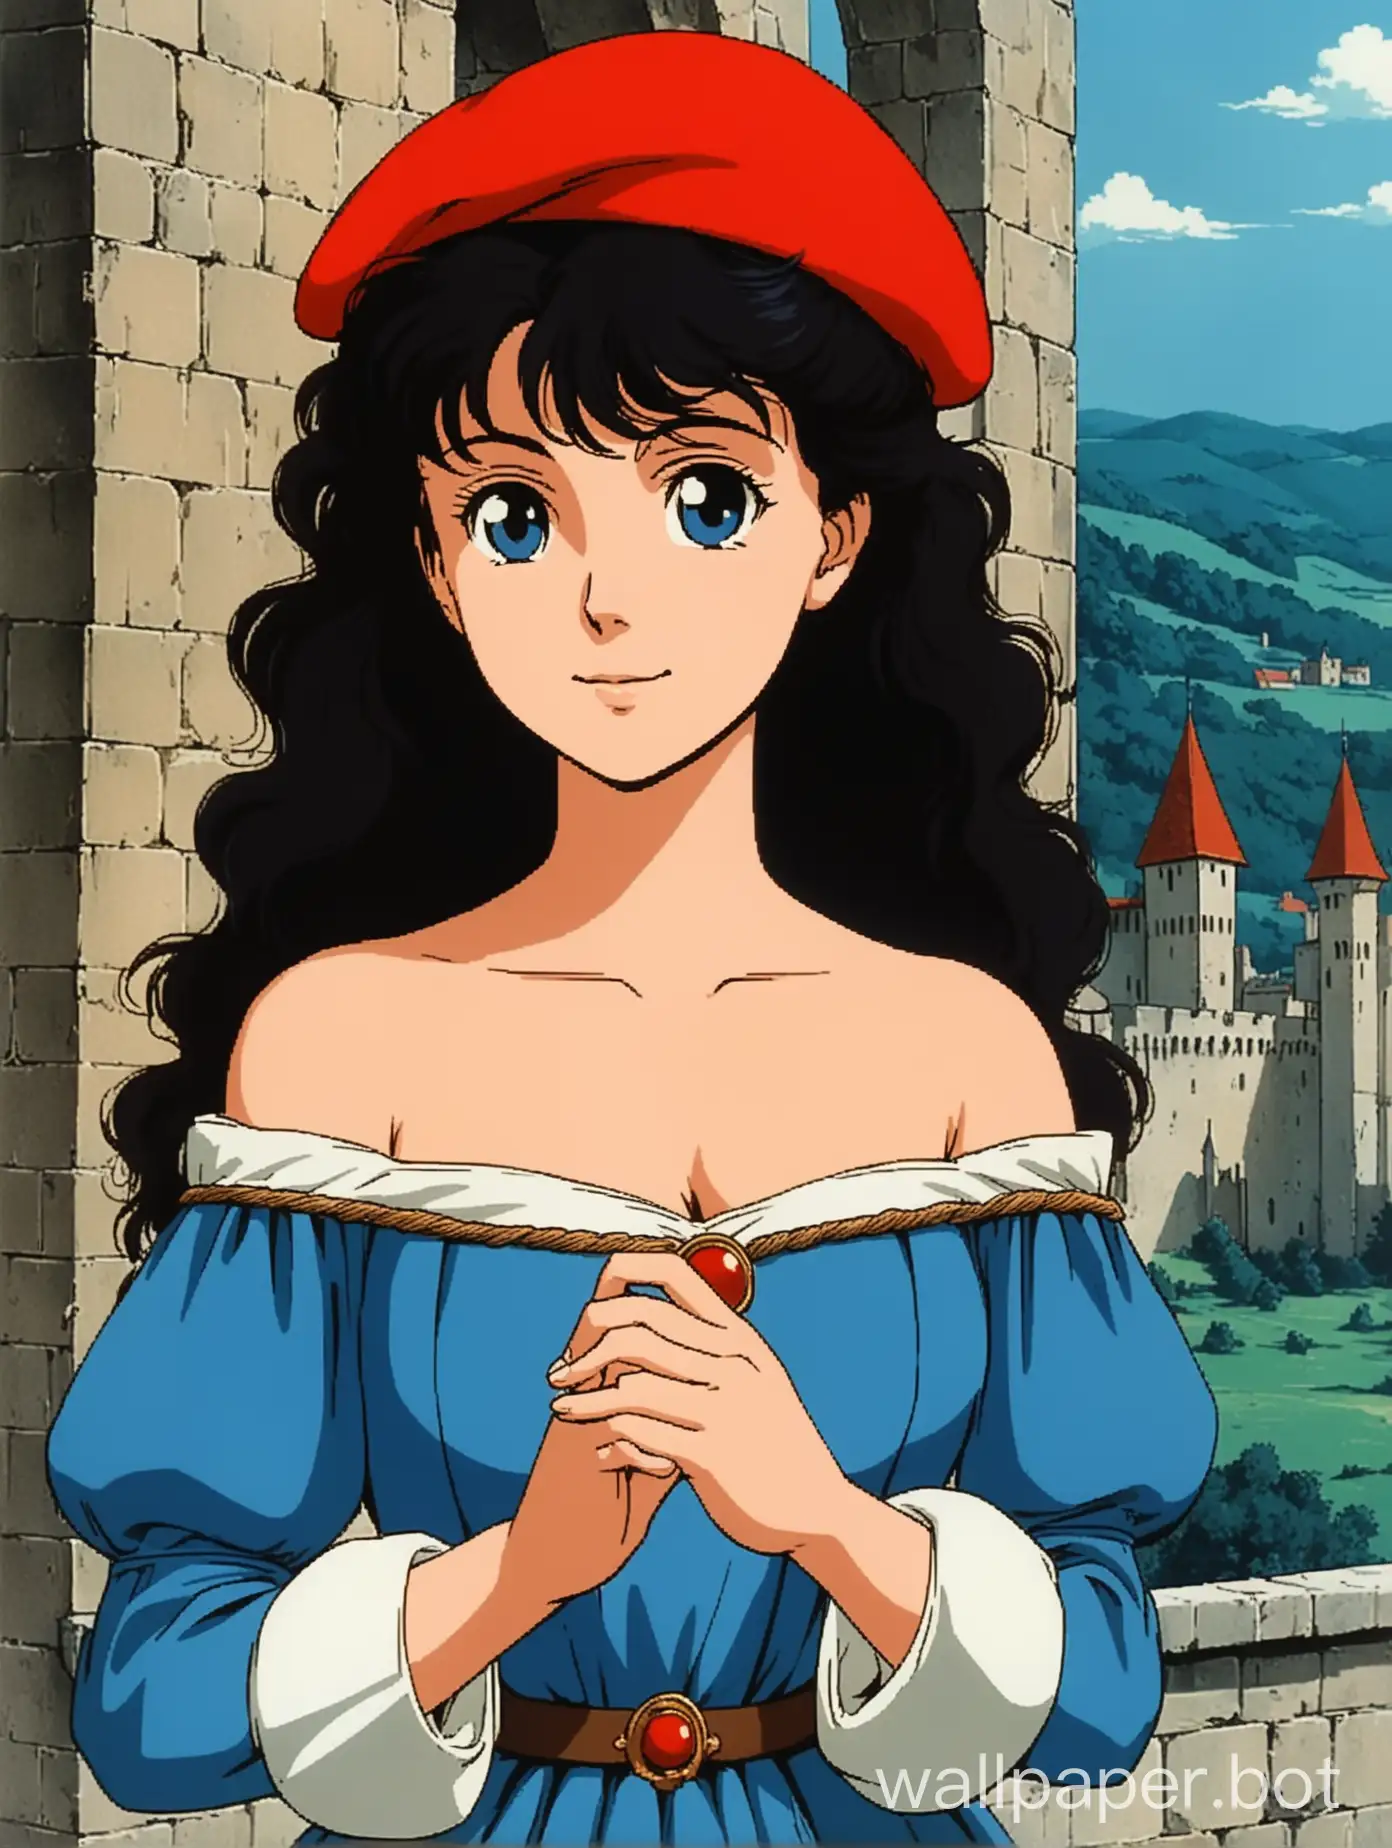 young French woman, pleasant face, black wavy hair in side braid, red beret, blue medieval dress, off-the-shoulder, deep plunging v, 1980s retro anime